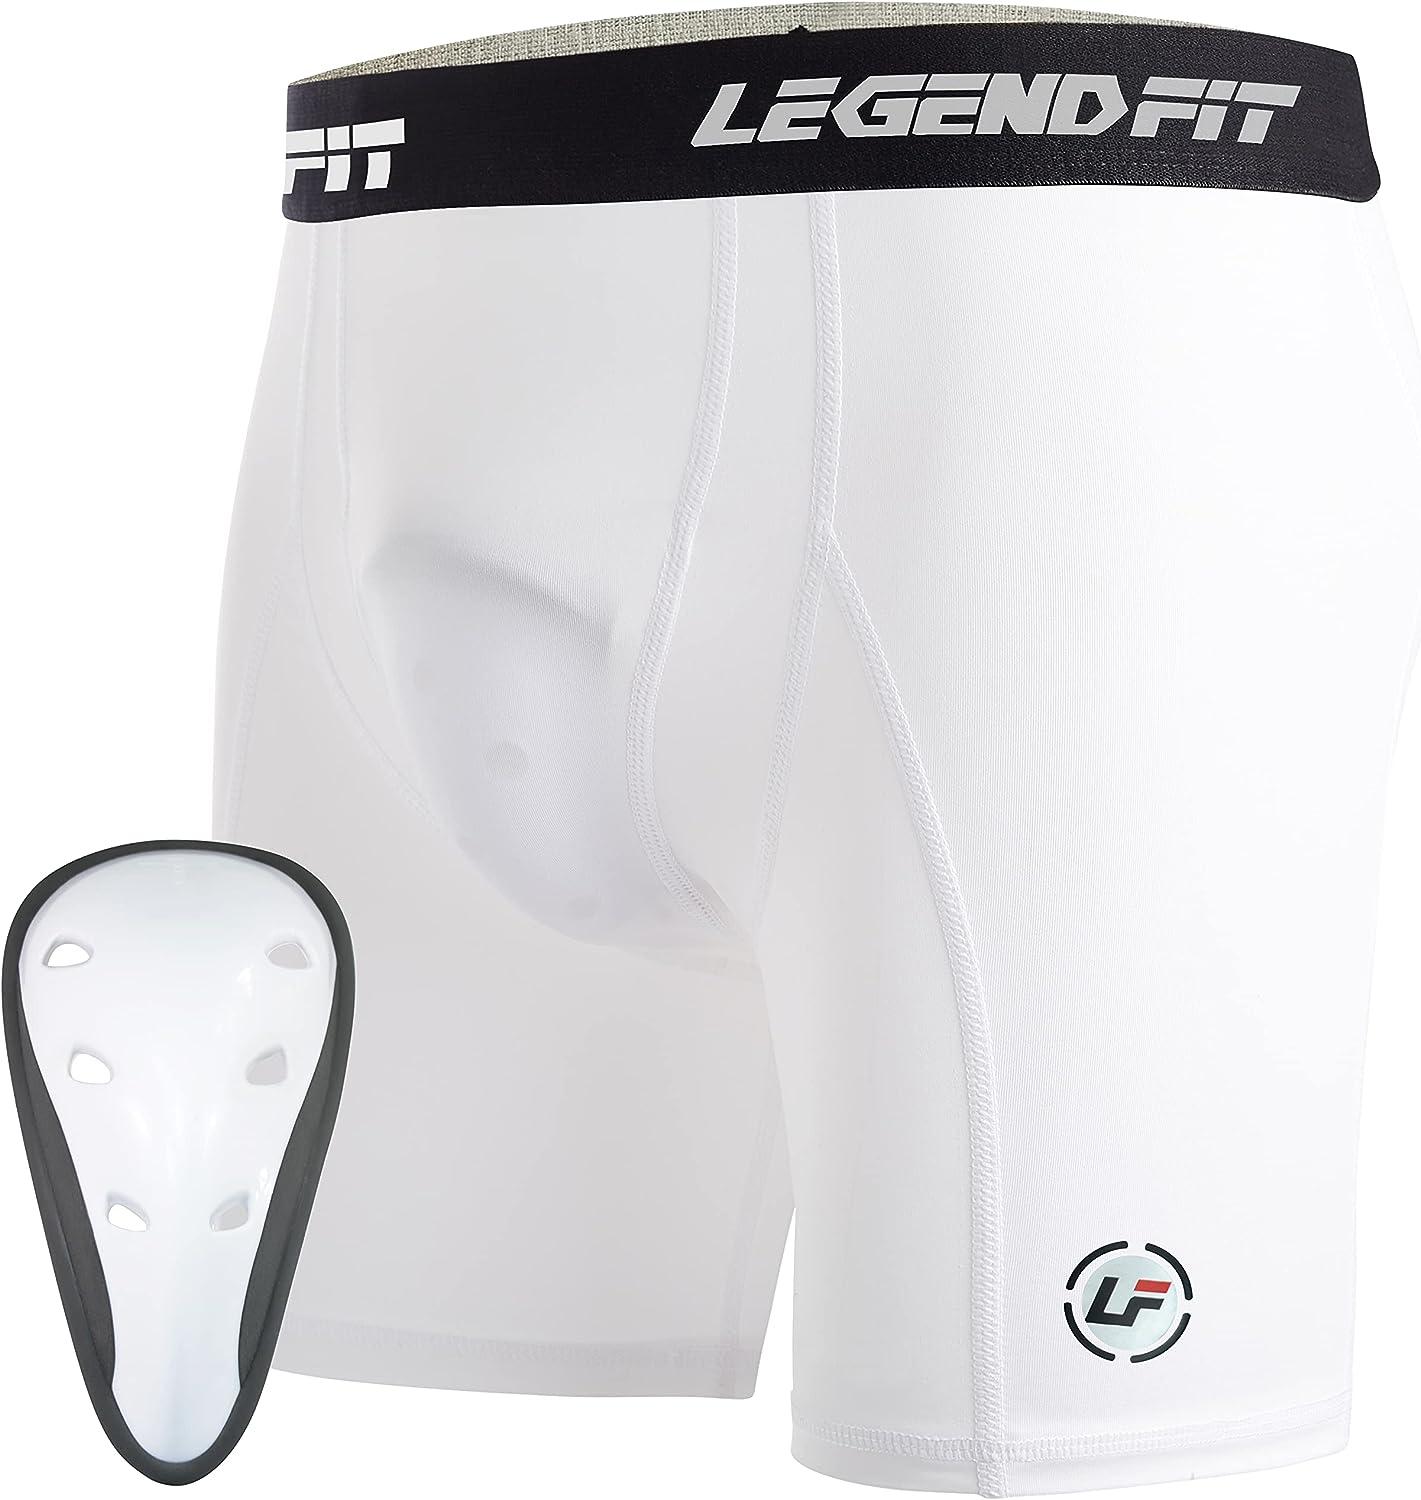 Legendfit Youth Boys Compression Shorts w/Cup Protector Athletic Sliding  Underwear Baseball Football Lacrosse Cricket